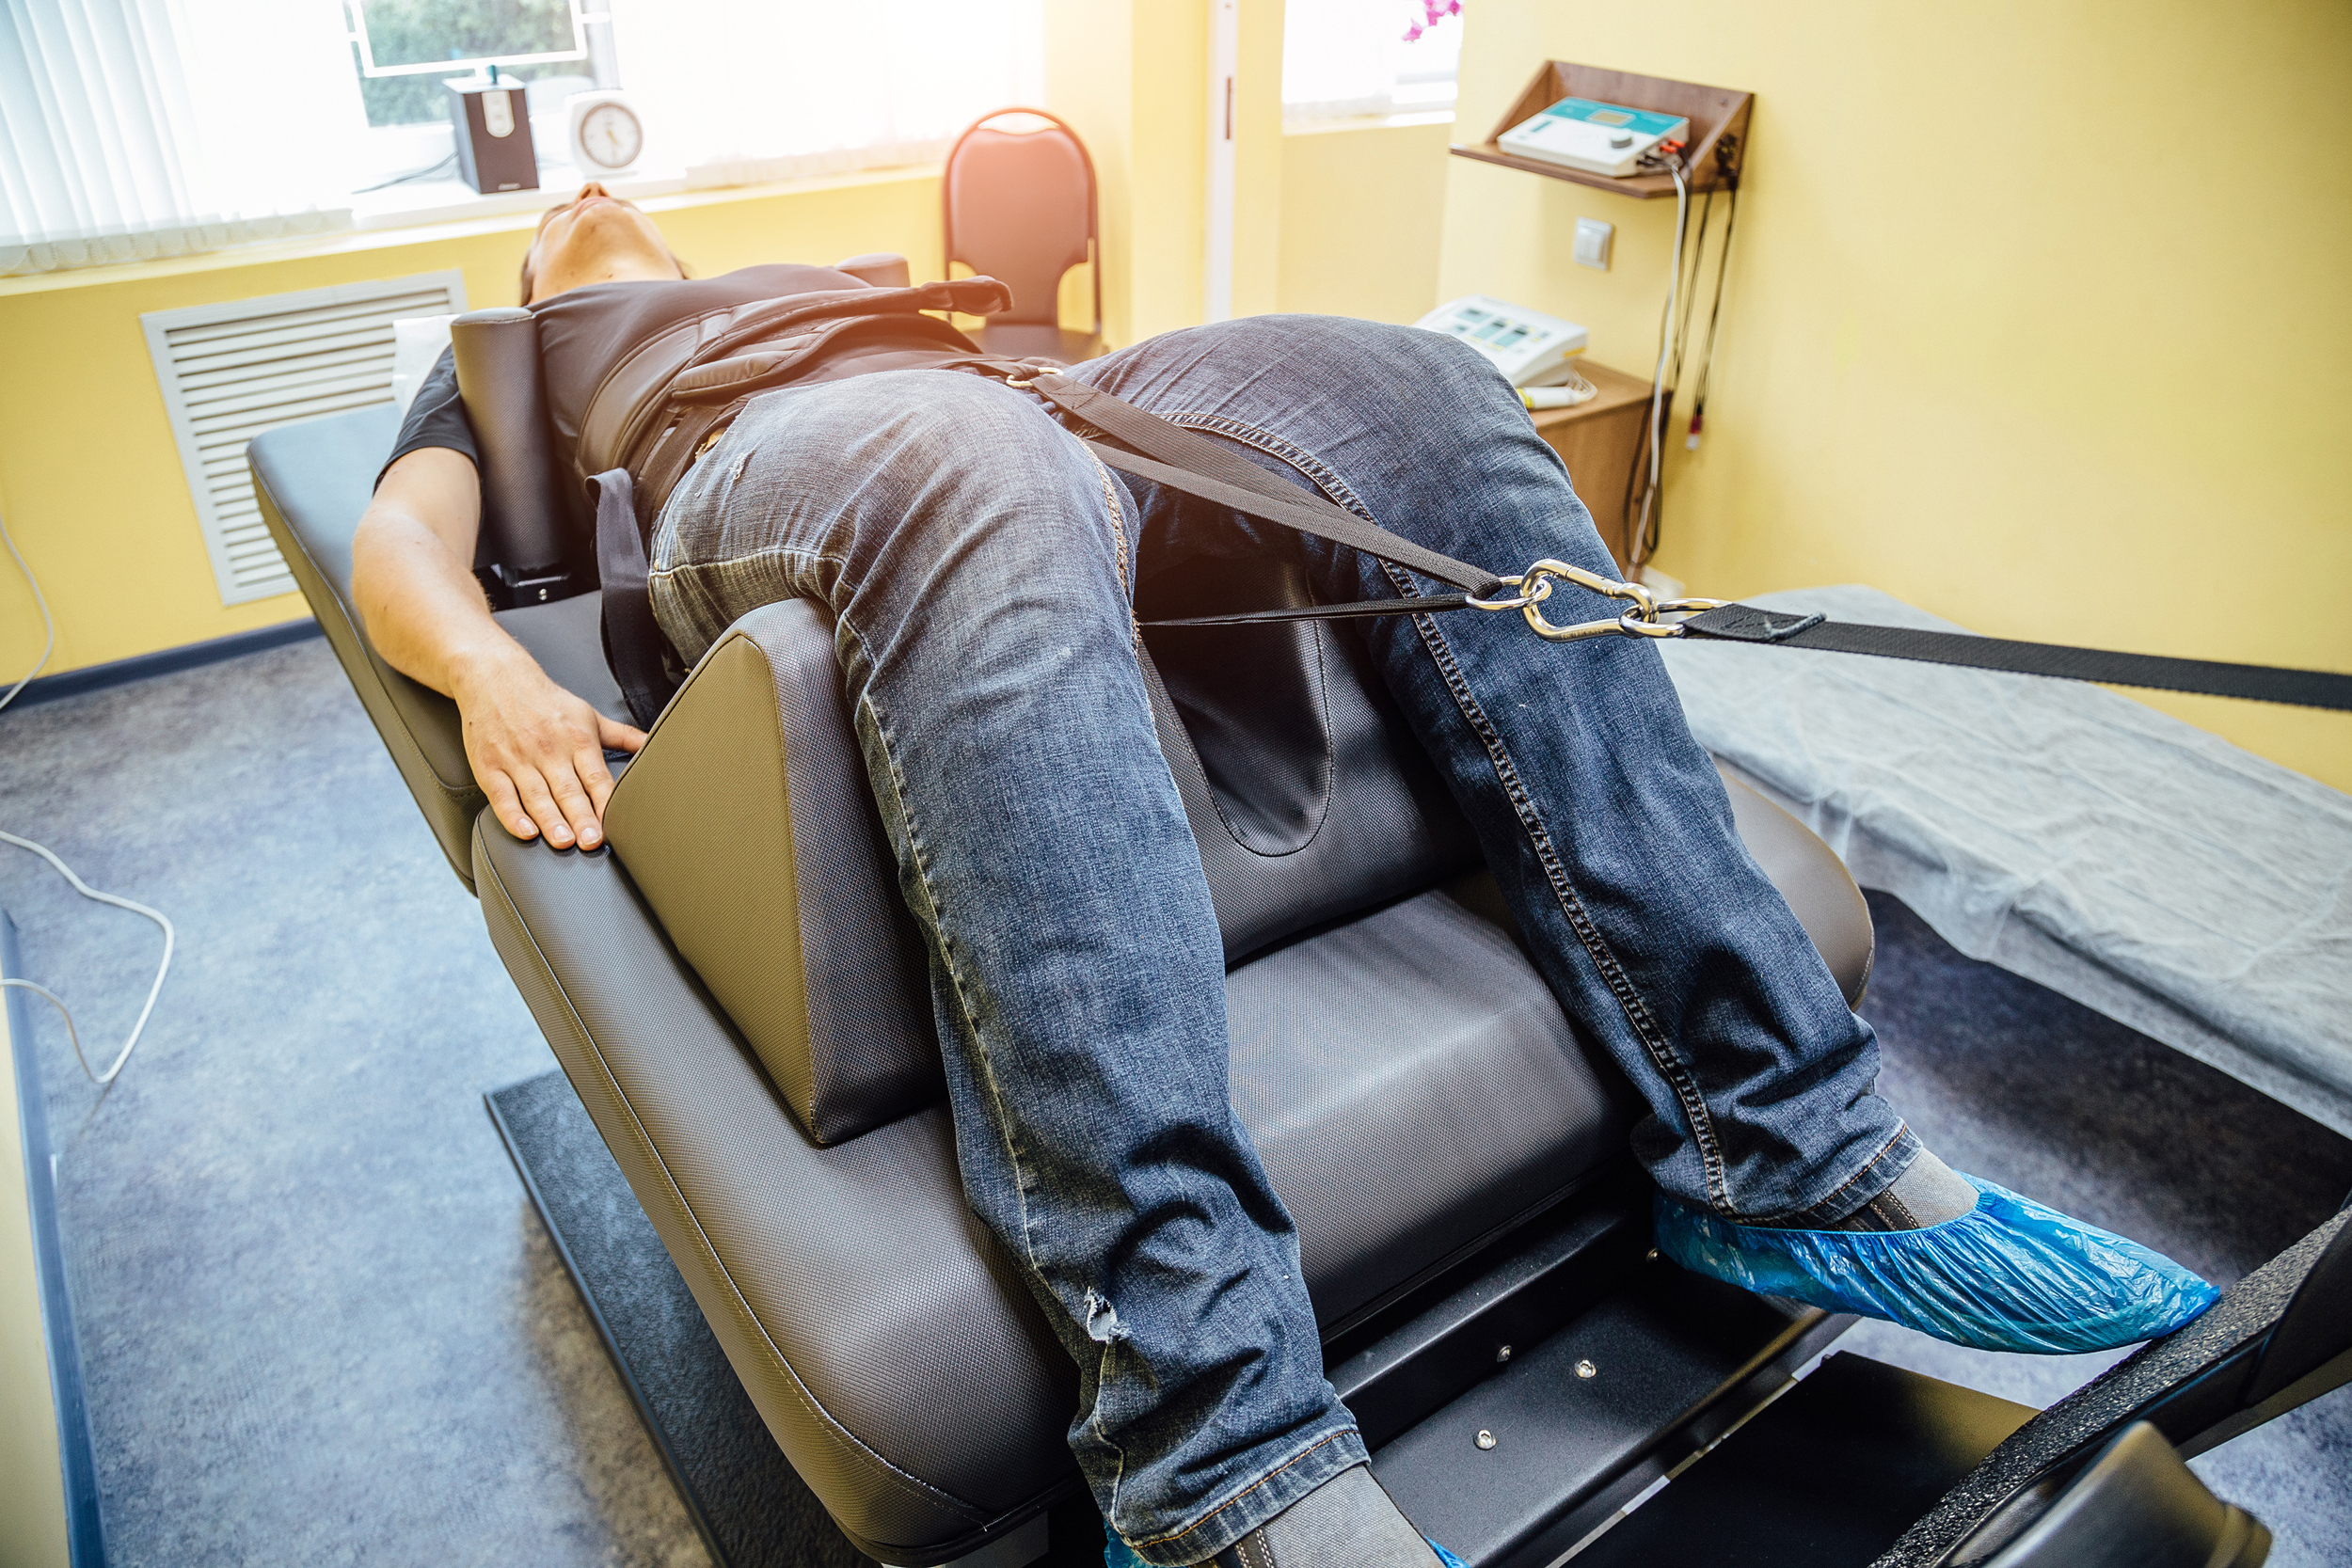 Real Stories: Patient Experiences with Spinal Decompression Therapy